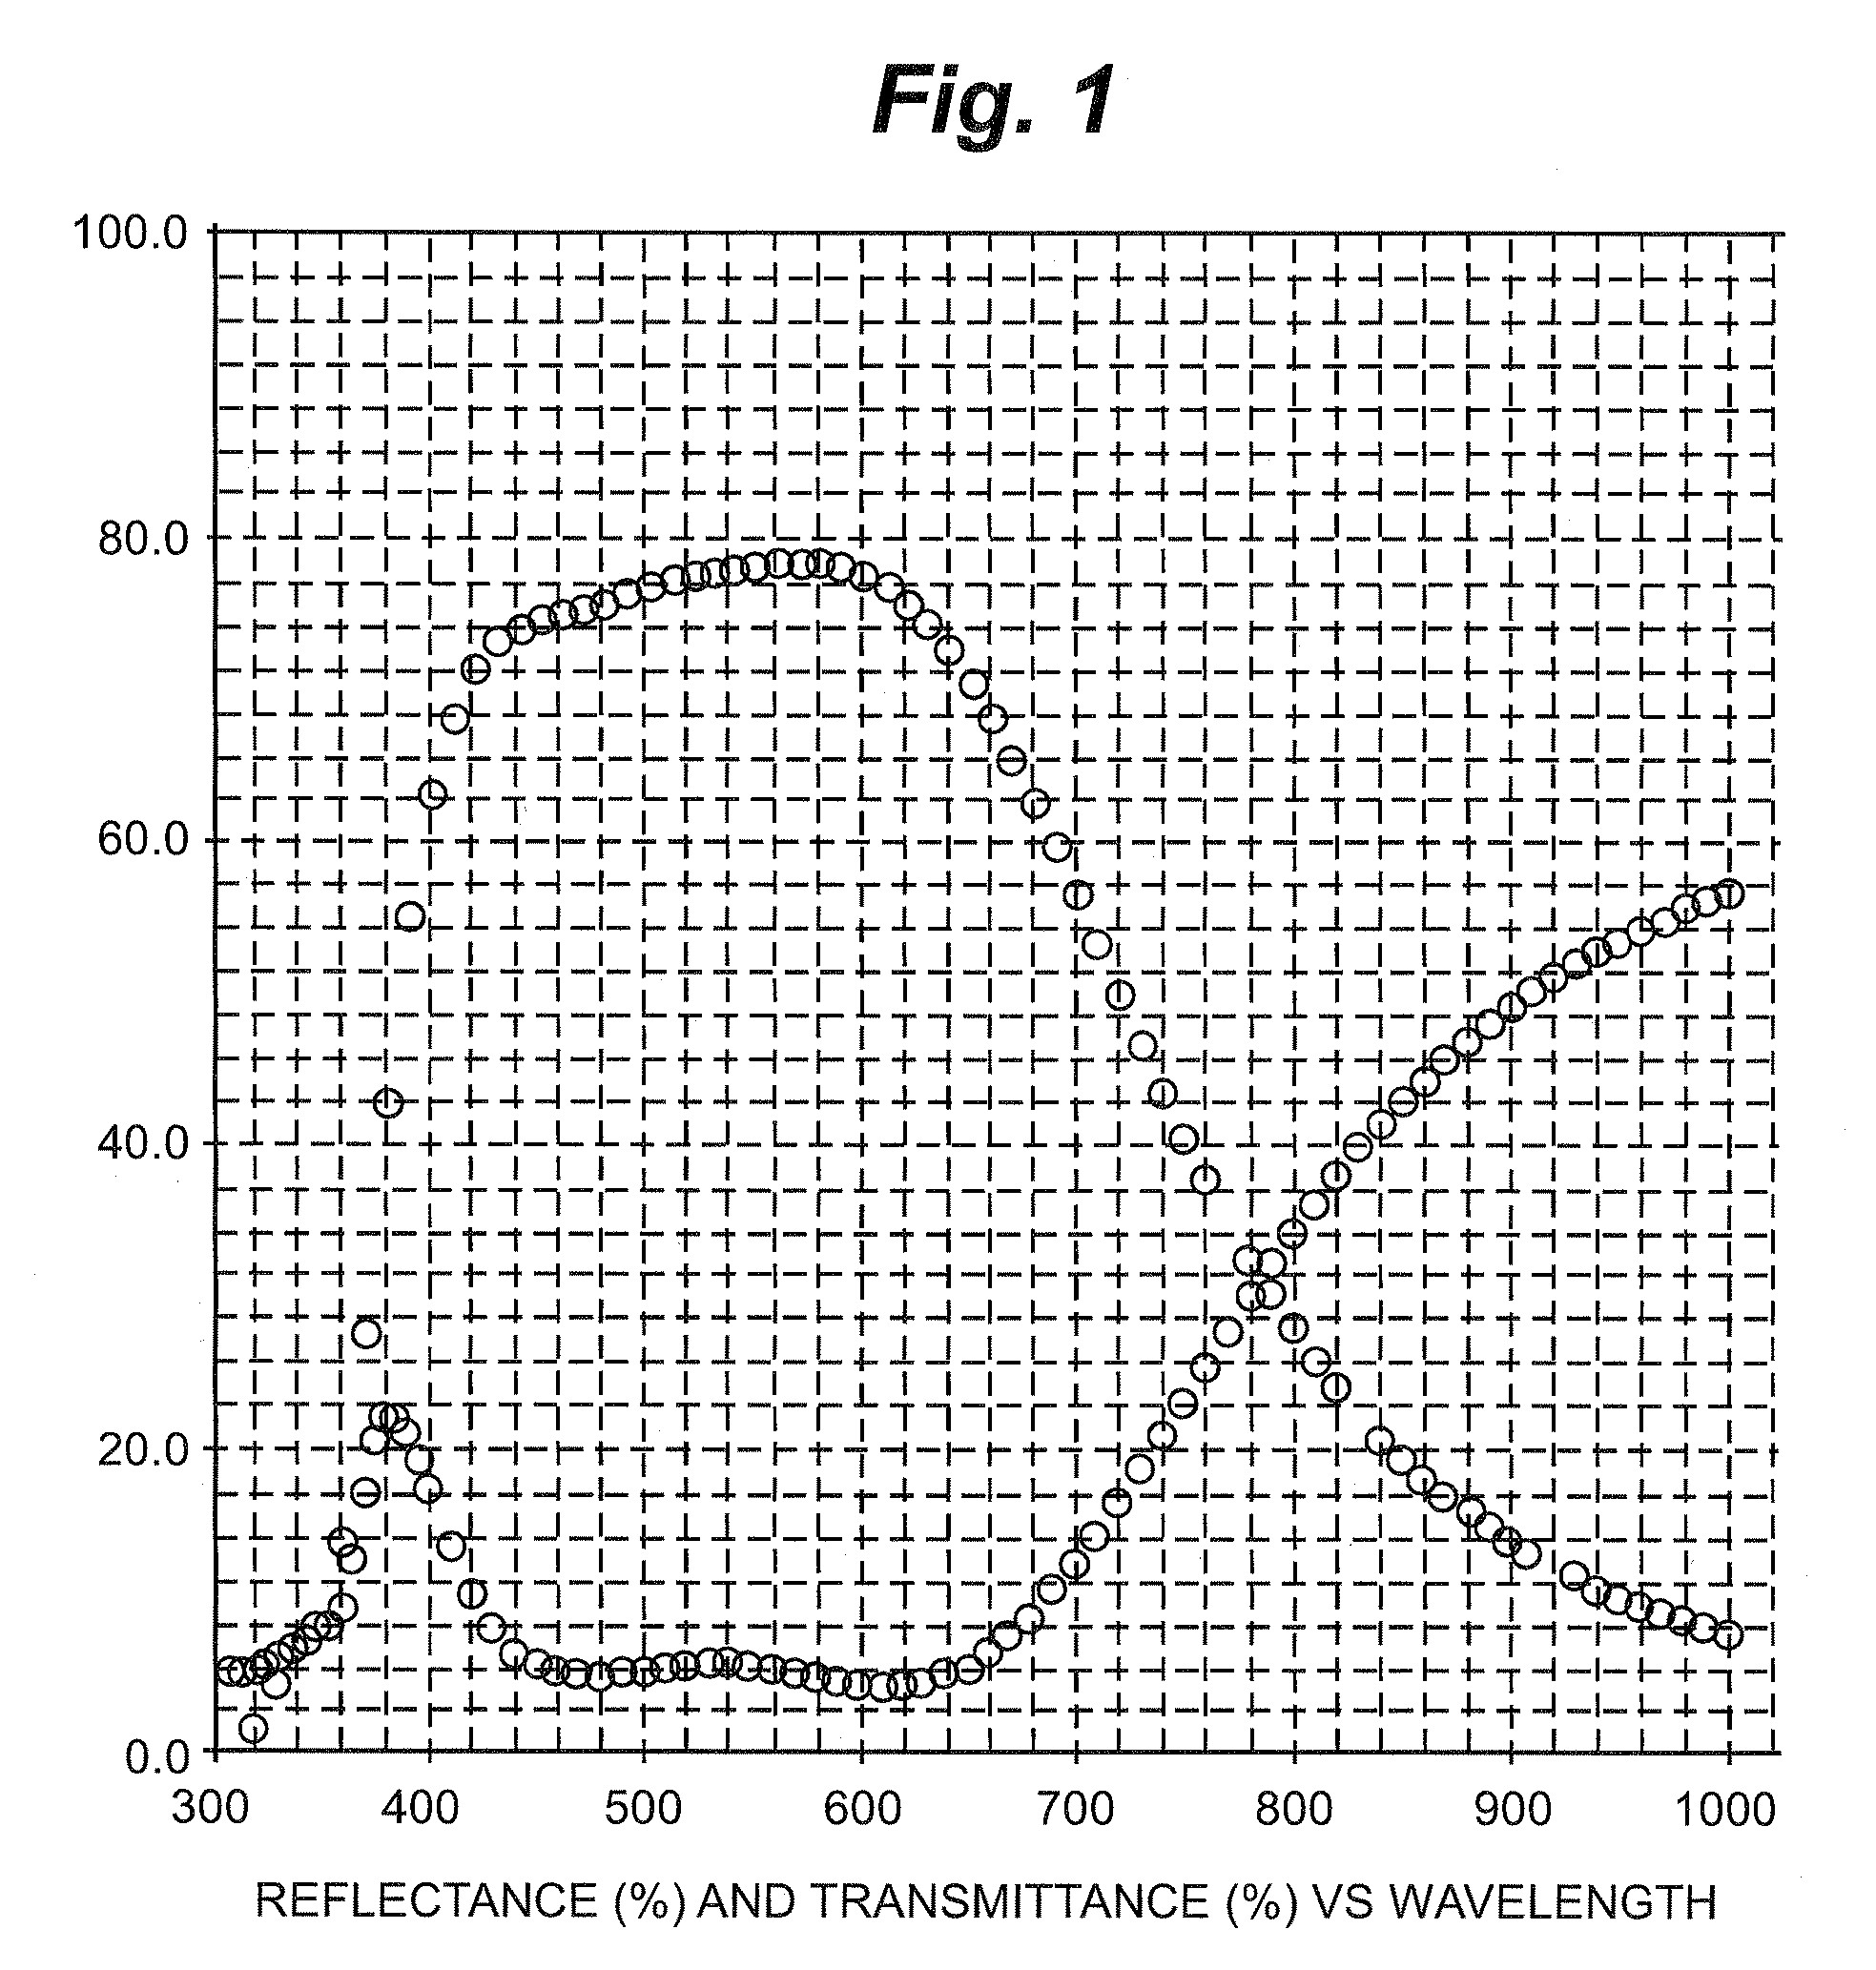 Methods and equipment for depositing high quality reflective coatings